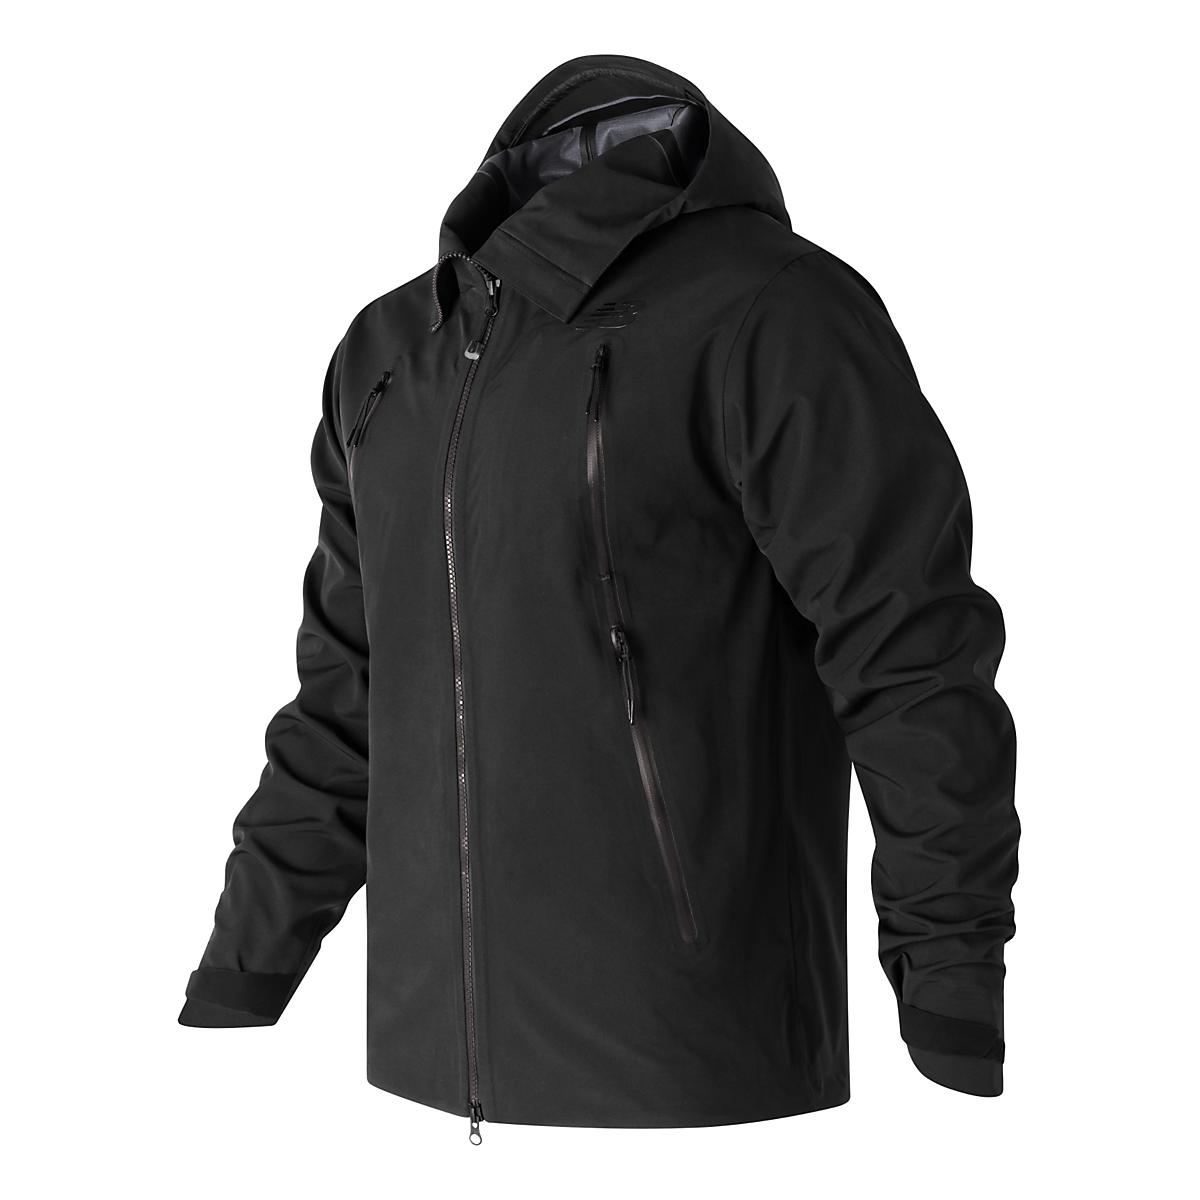 Mens New Balance 3 Layer Cold Weather Jackets at Road Runner Sports